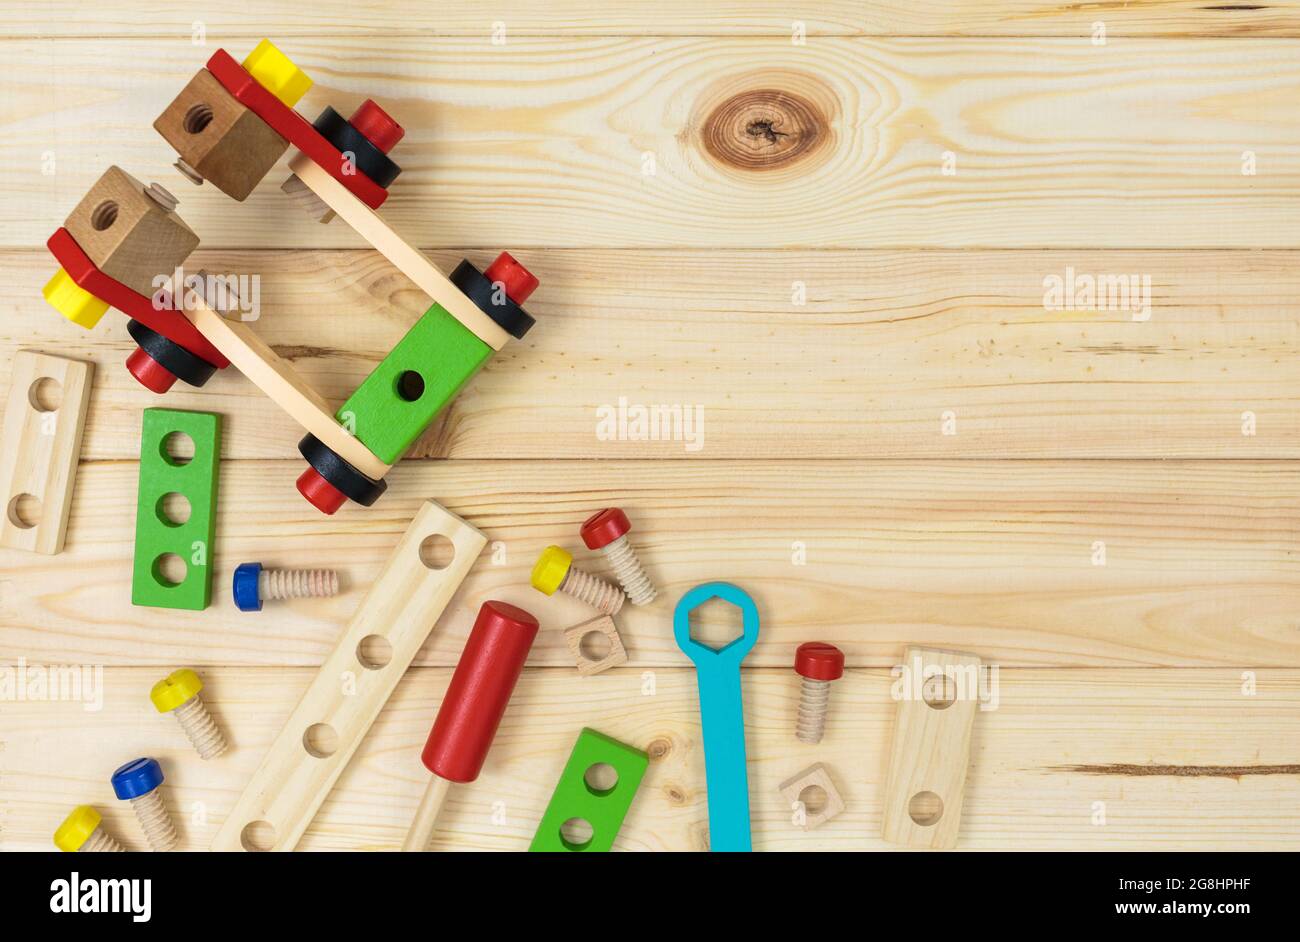 A colorful wooden building kit for children on wood. Set of tools on wooden table. Games and tools for kids in preschool or daycare. Natural, eco-frie Stock Photo